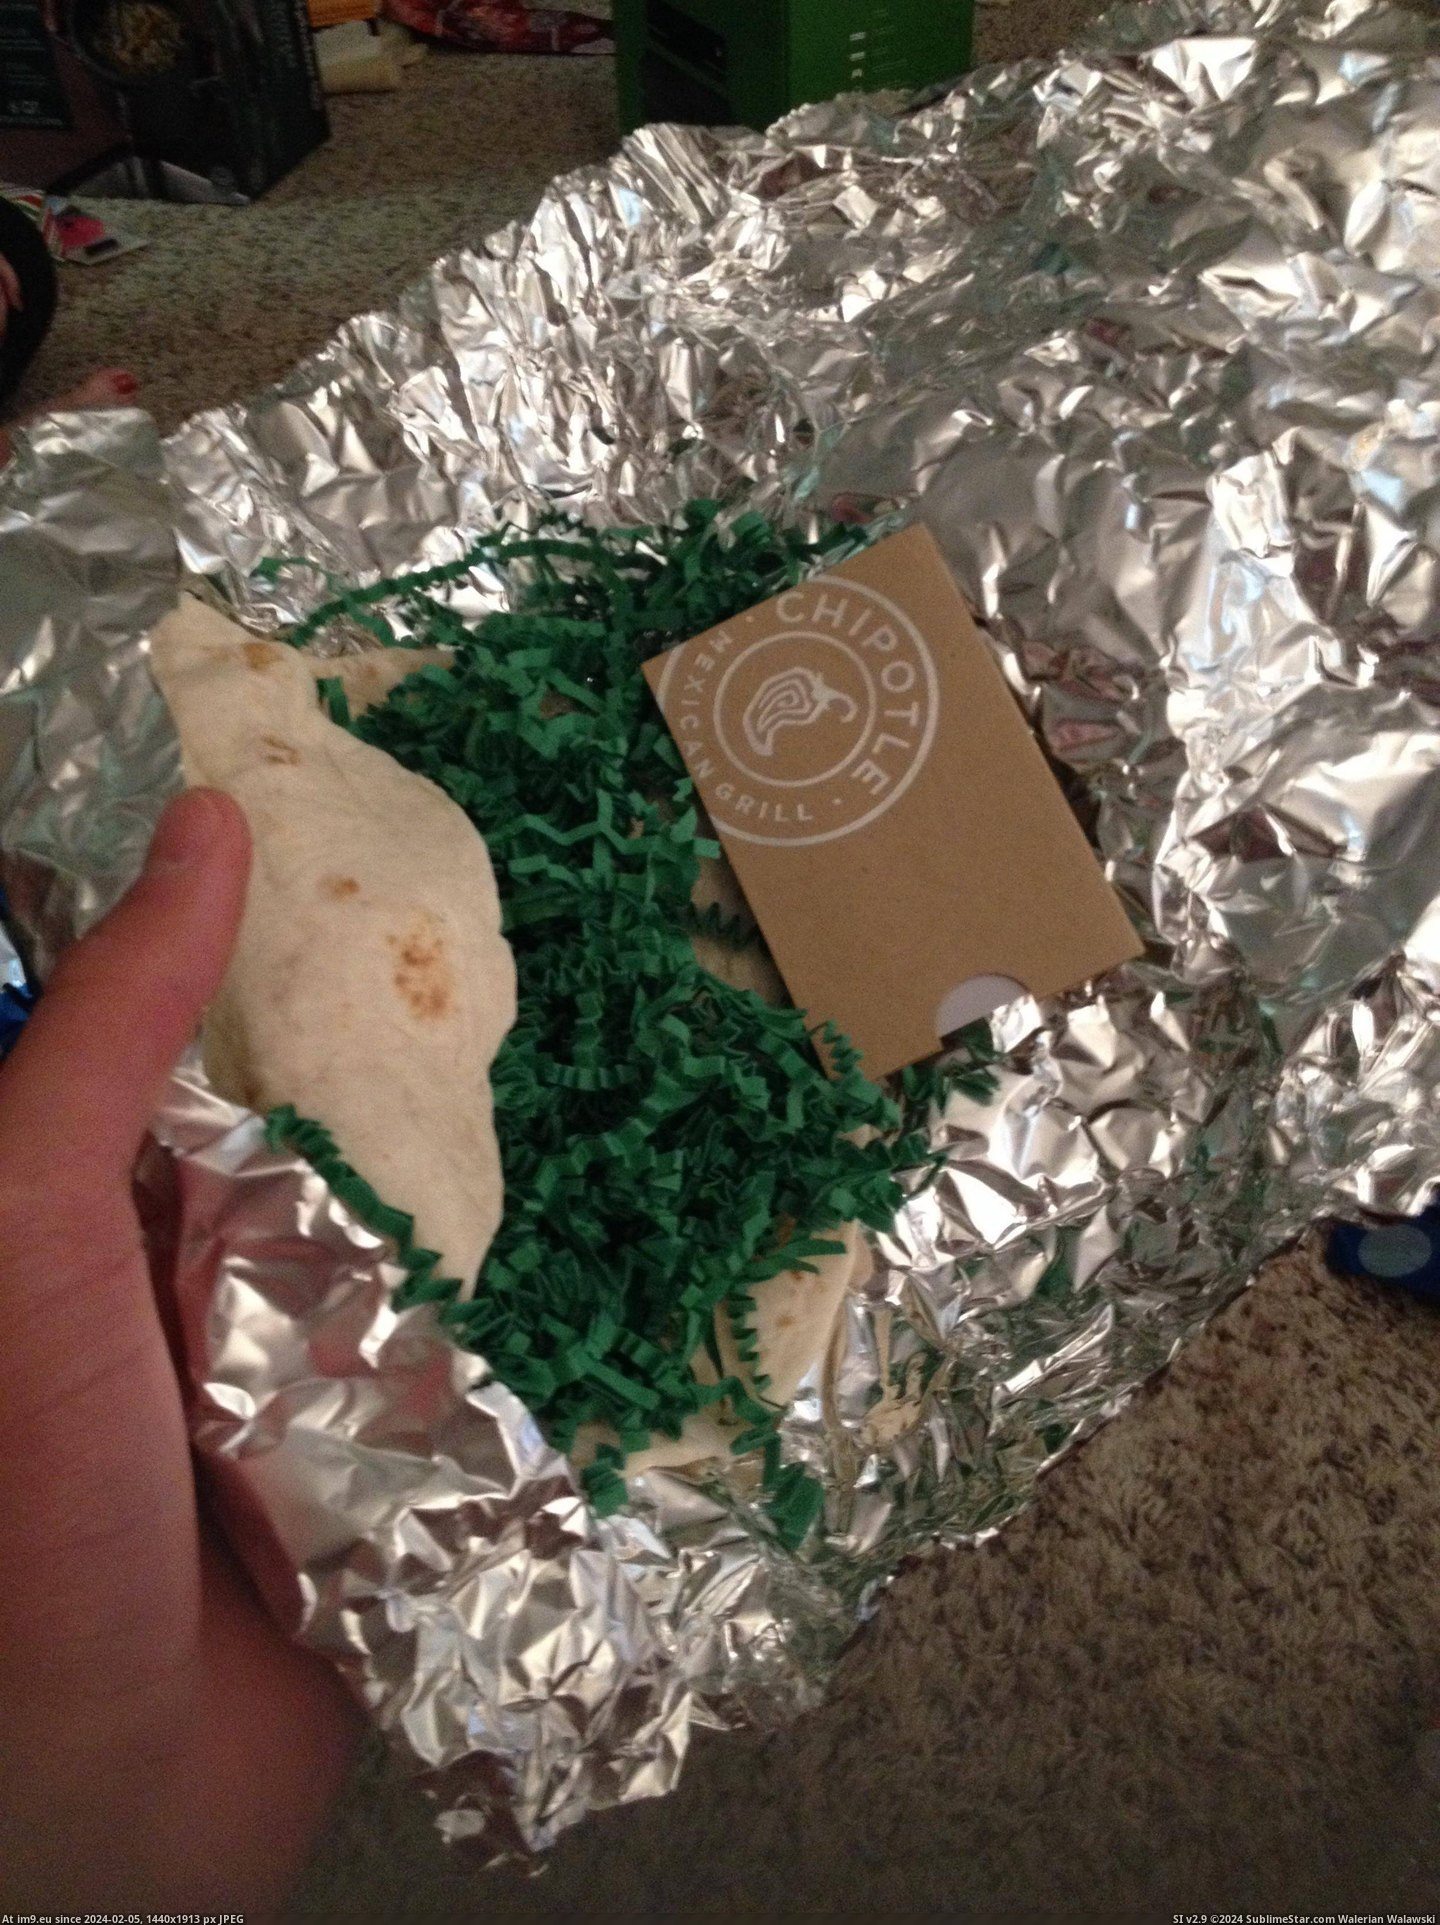 #Funny #How #Card #Wrapped #Chipotle #Mother #Gift [Funny] How my mother wrapped a chipotle gift card. Pic. (Изображение из альбом My r/FUNNY favs))